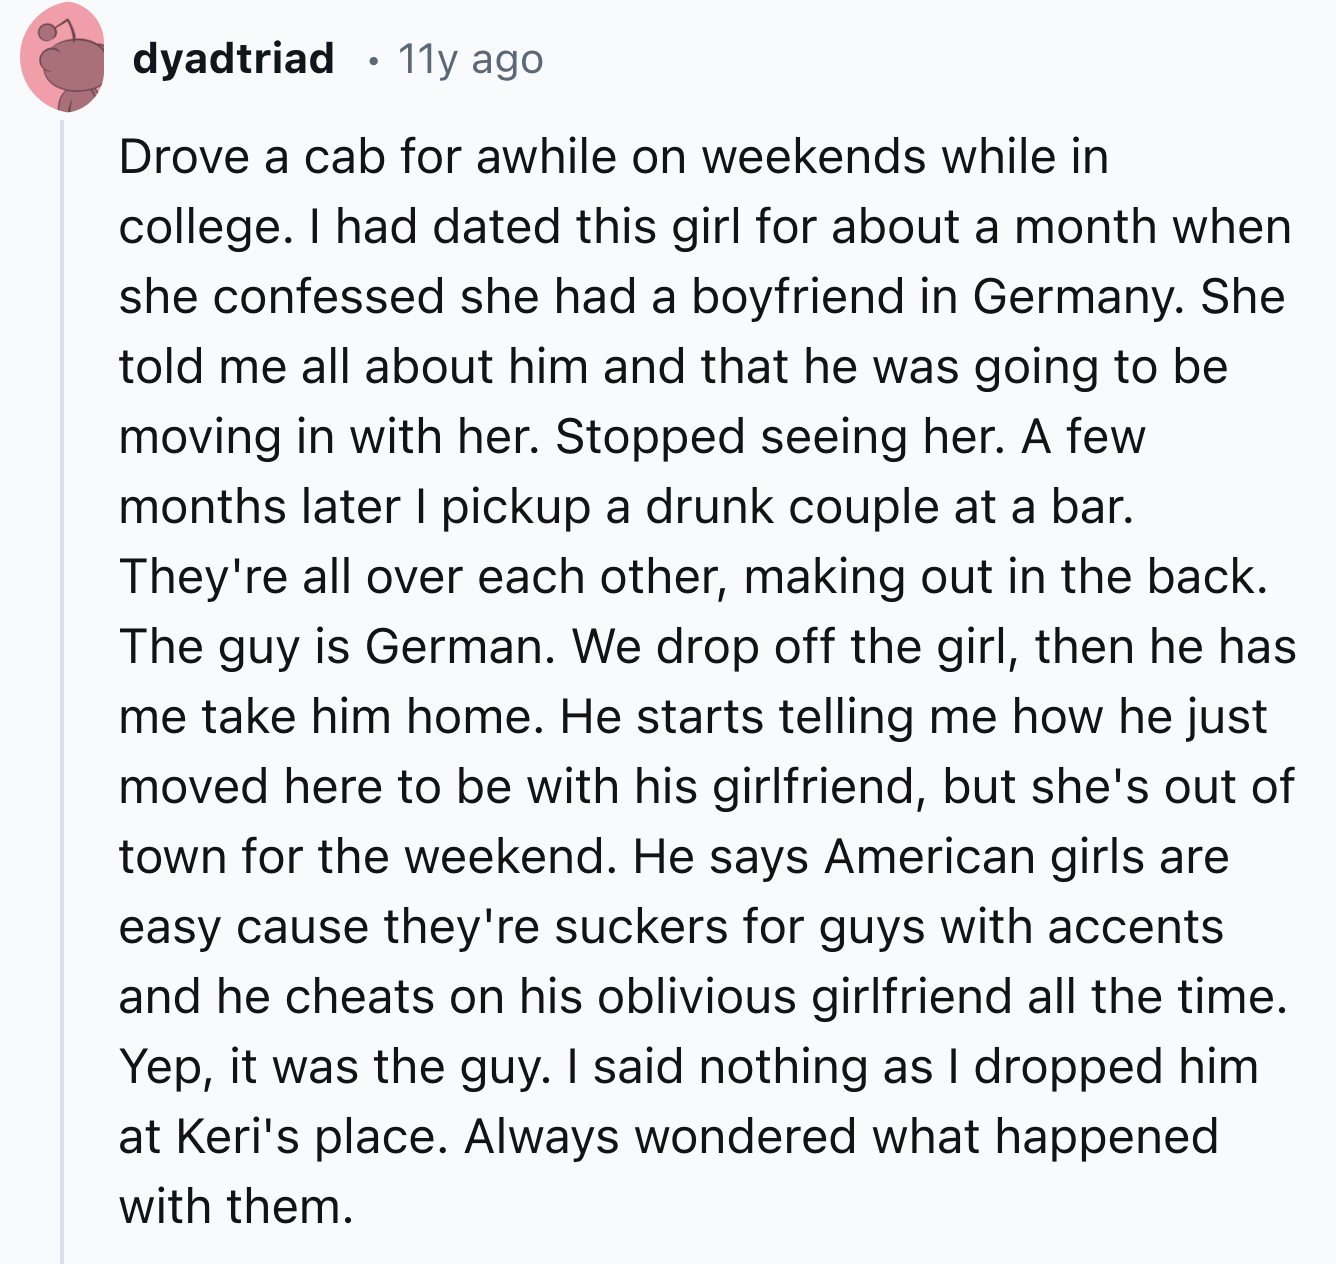 document - dyadtriad 11y ago Drove a cab for awhile on weekends while in college. I had dated this girl for about a month when she confessed she had a boyfriend in Germany. She told me all about him and that he was going to be moving in with her. Stopped 